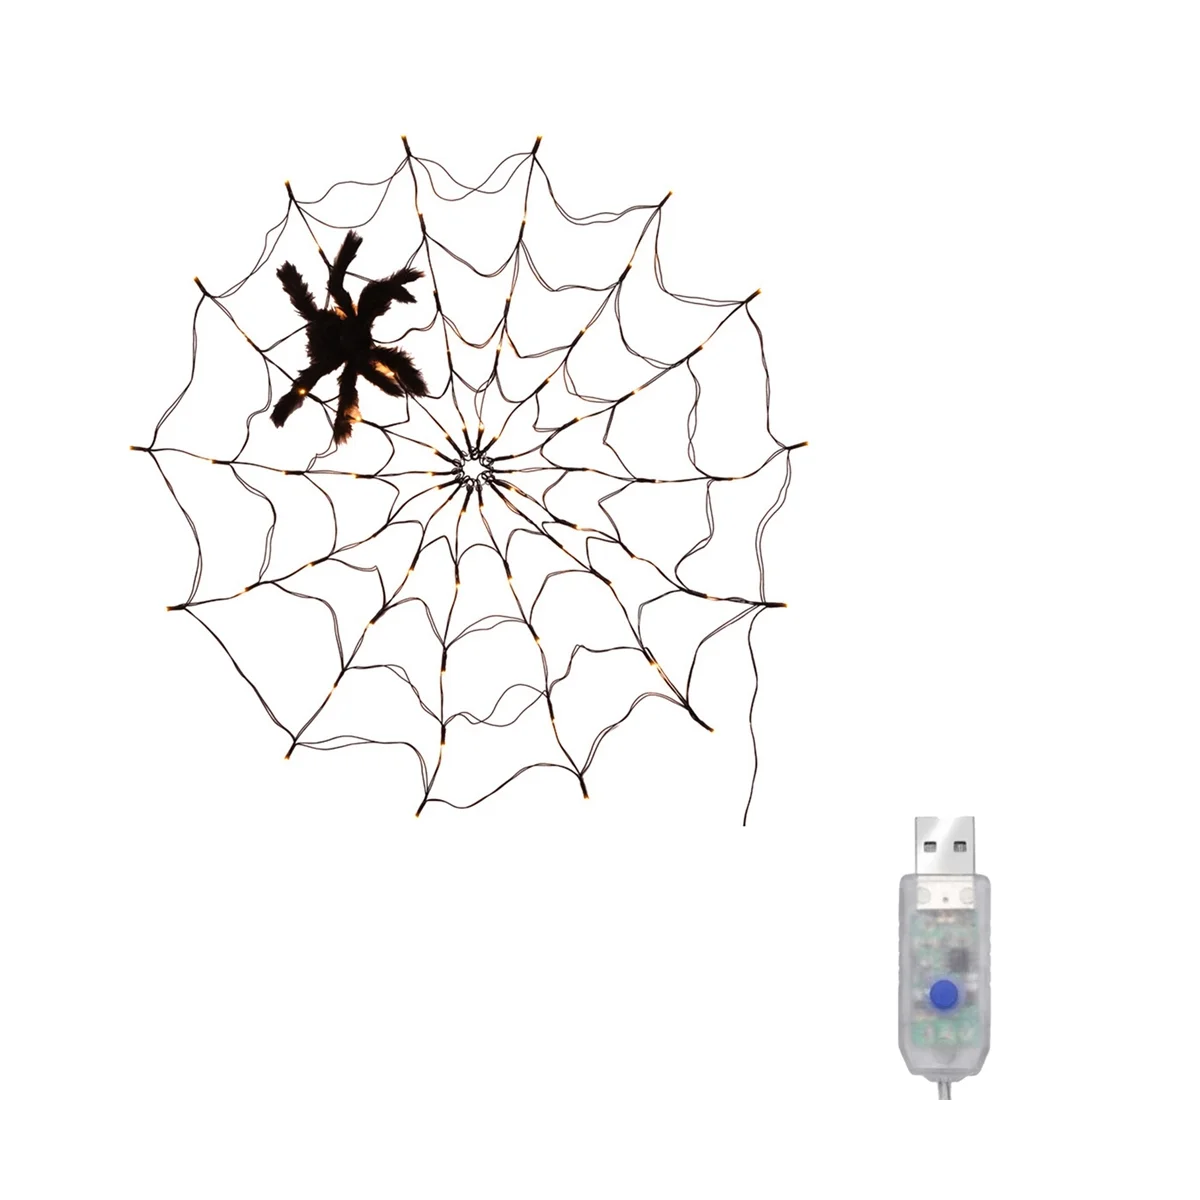 

Halloween Decorations LED Lights Spider Web Decoration Wall Mesh Lights Remote Control Halloween Atmosphere Lights A